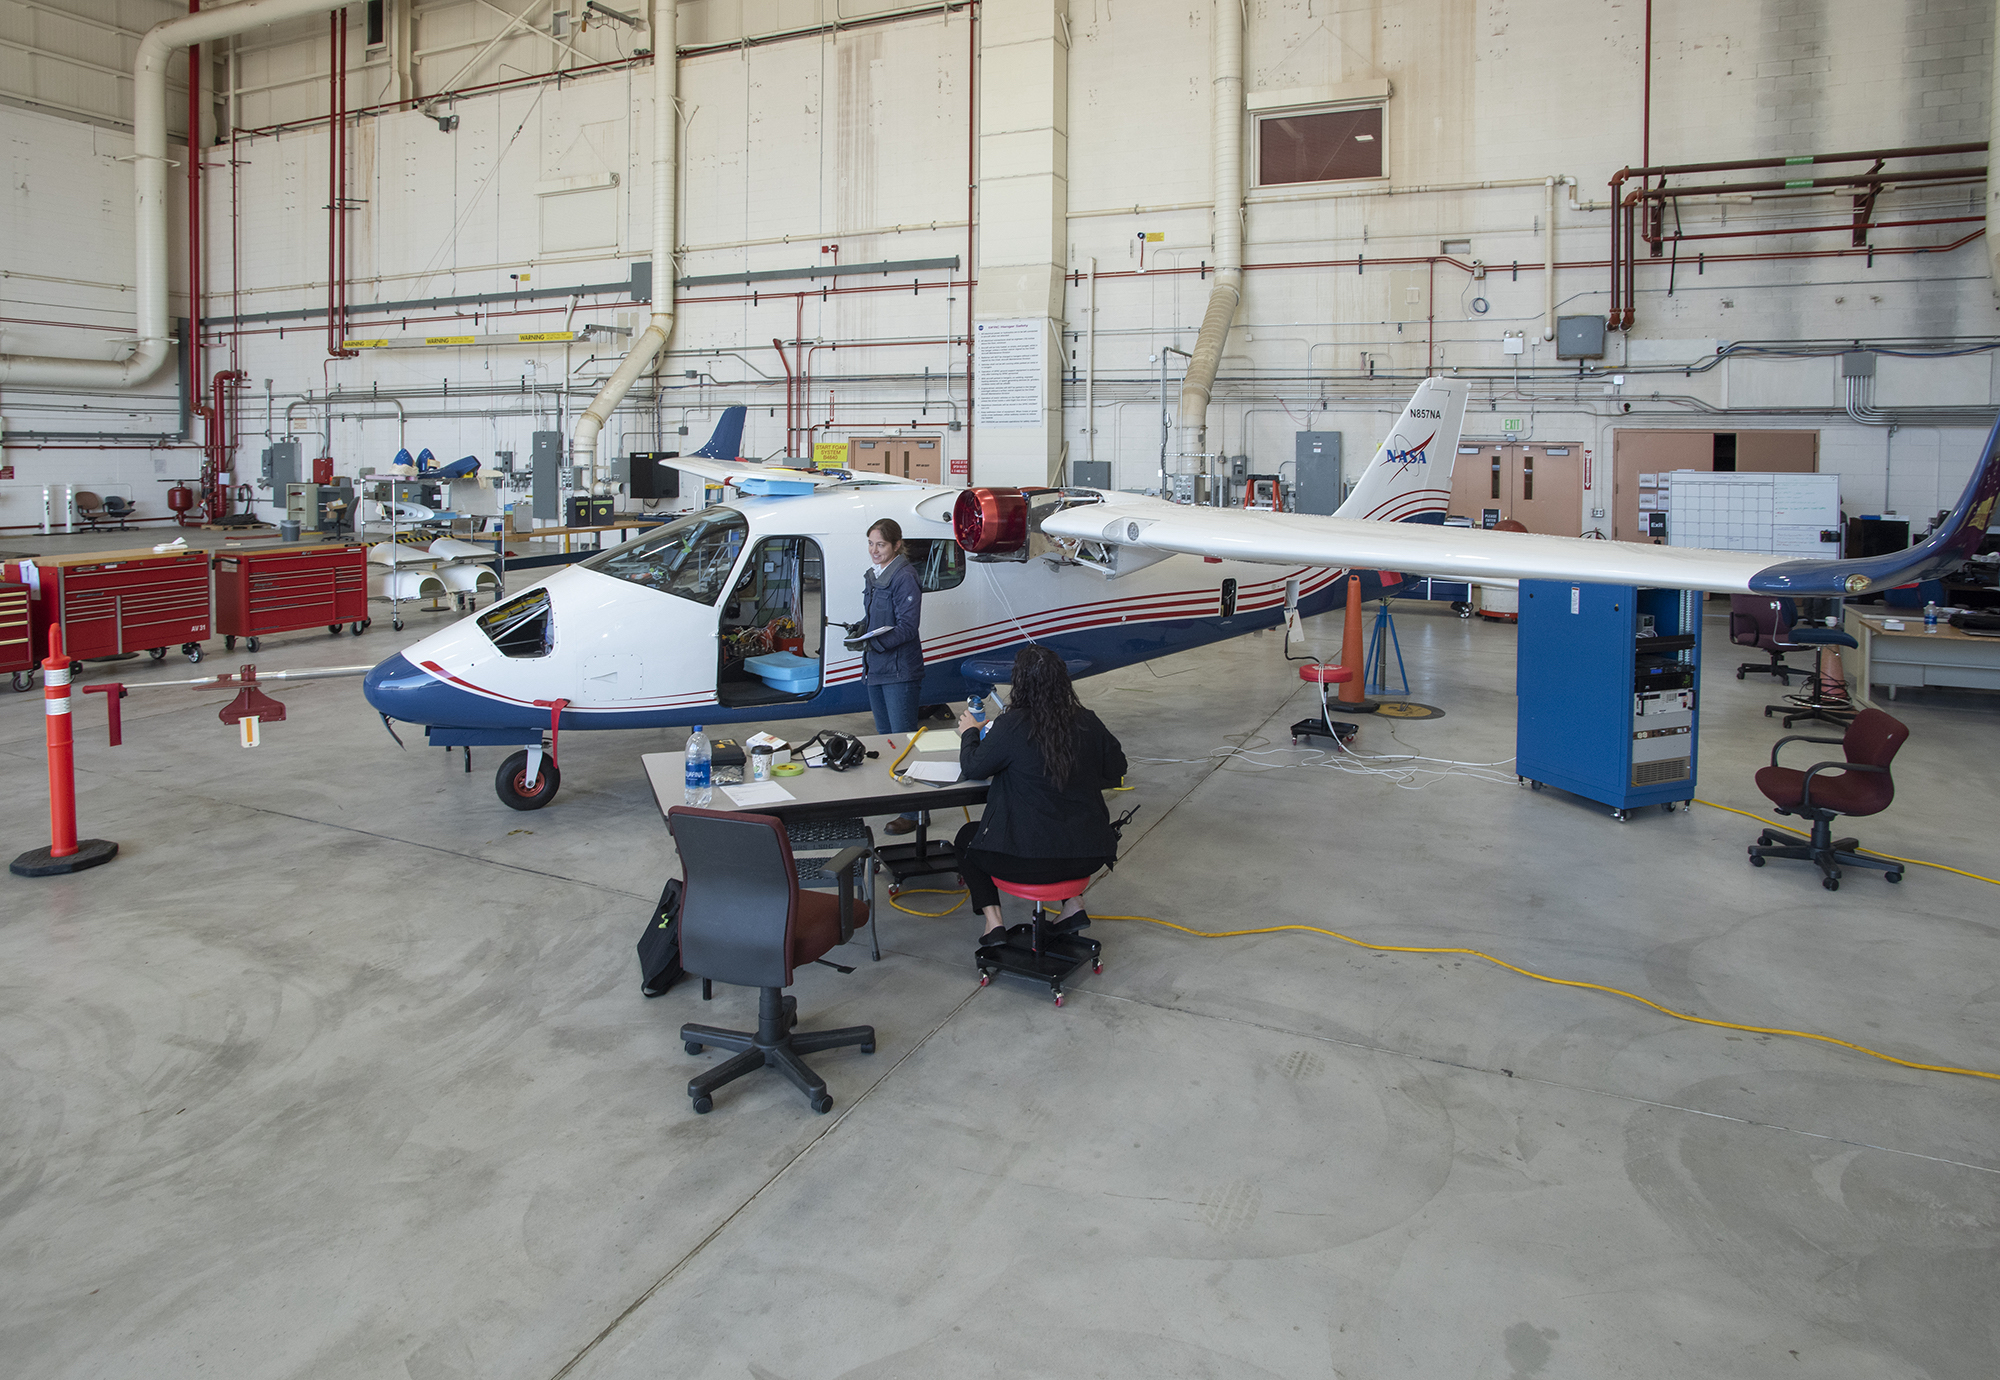 NASA’s experimental electric plane could take to the skies this year